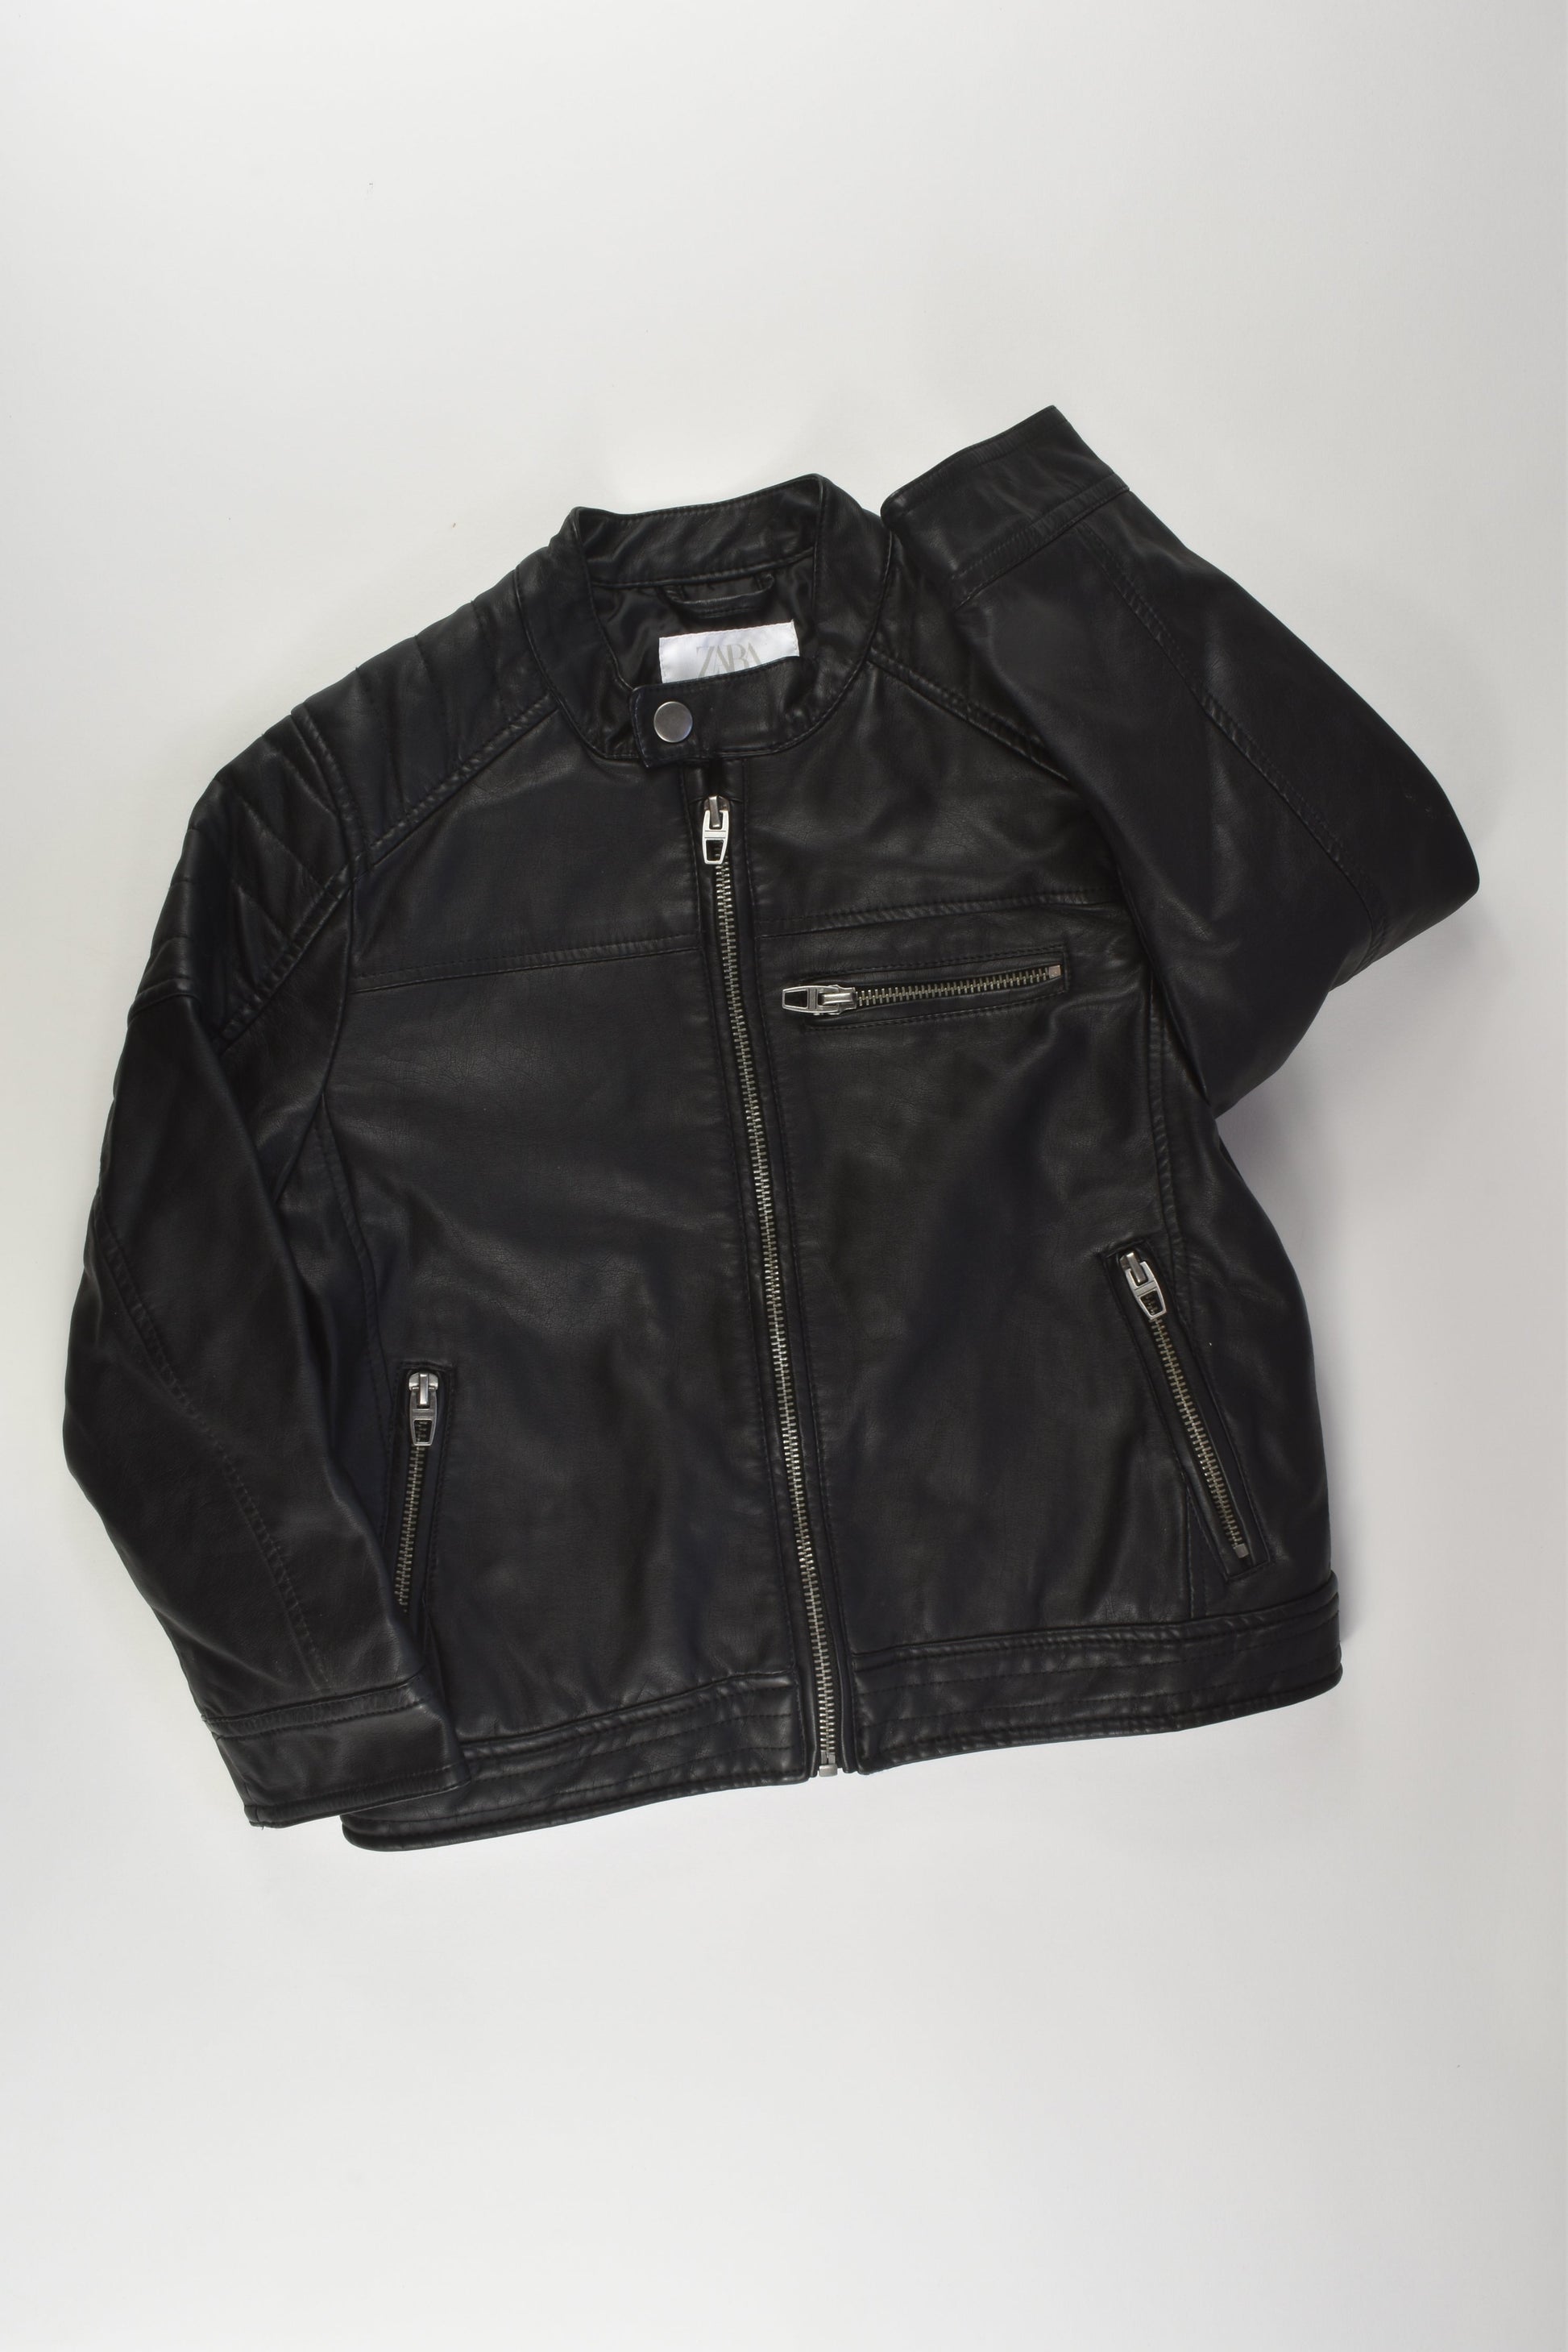 Zara Size 7 Leather-like Jacket – MiniMe Preloved - Baby and Kids' Clothes